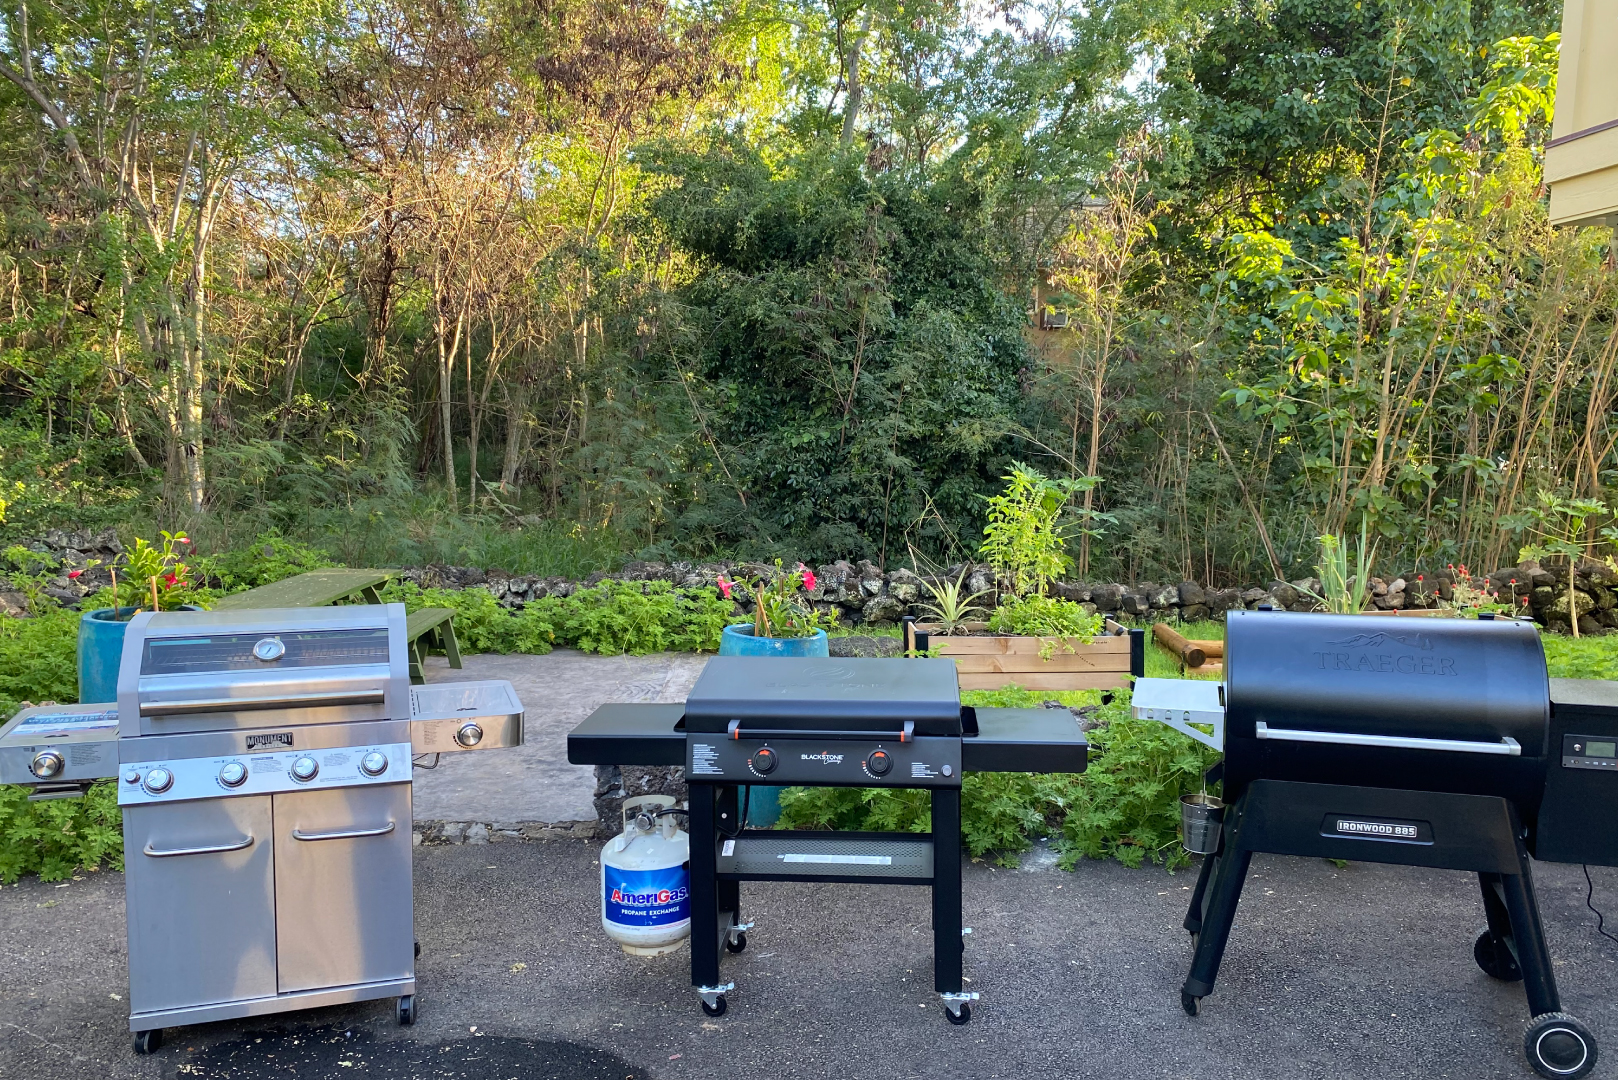 A view of the available outdoor cooking options